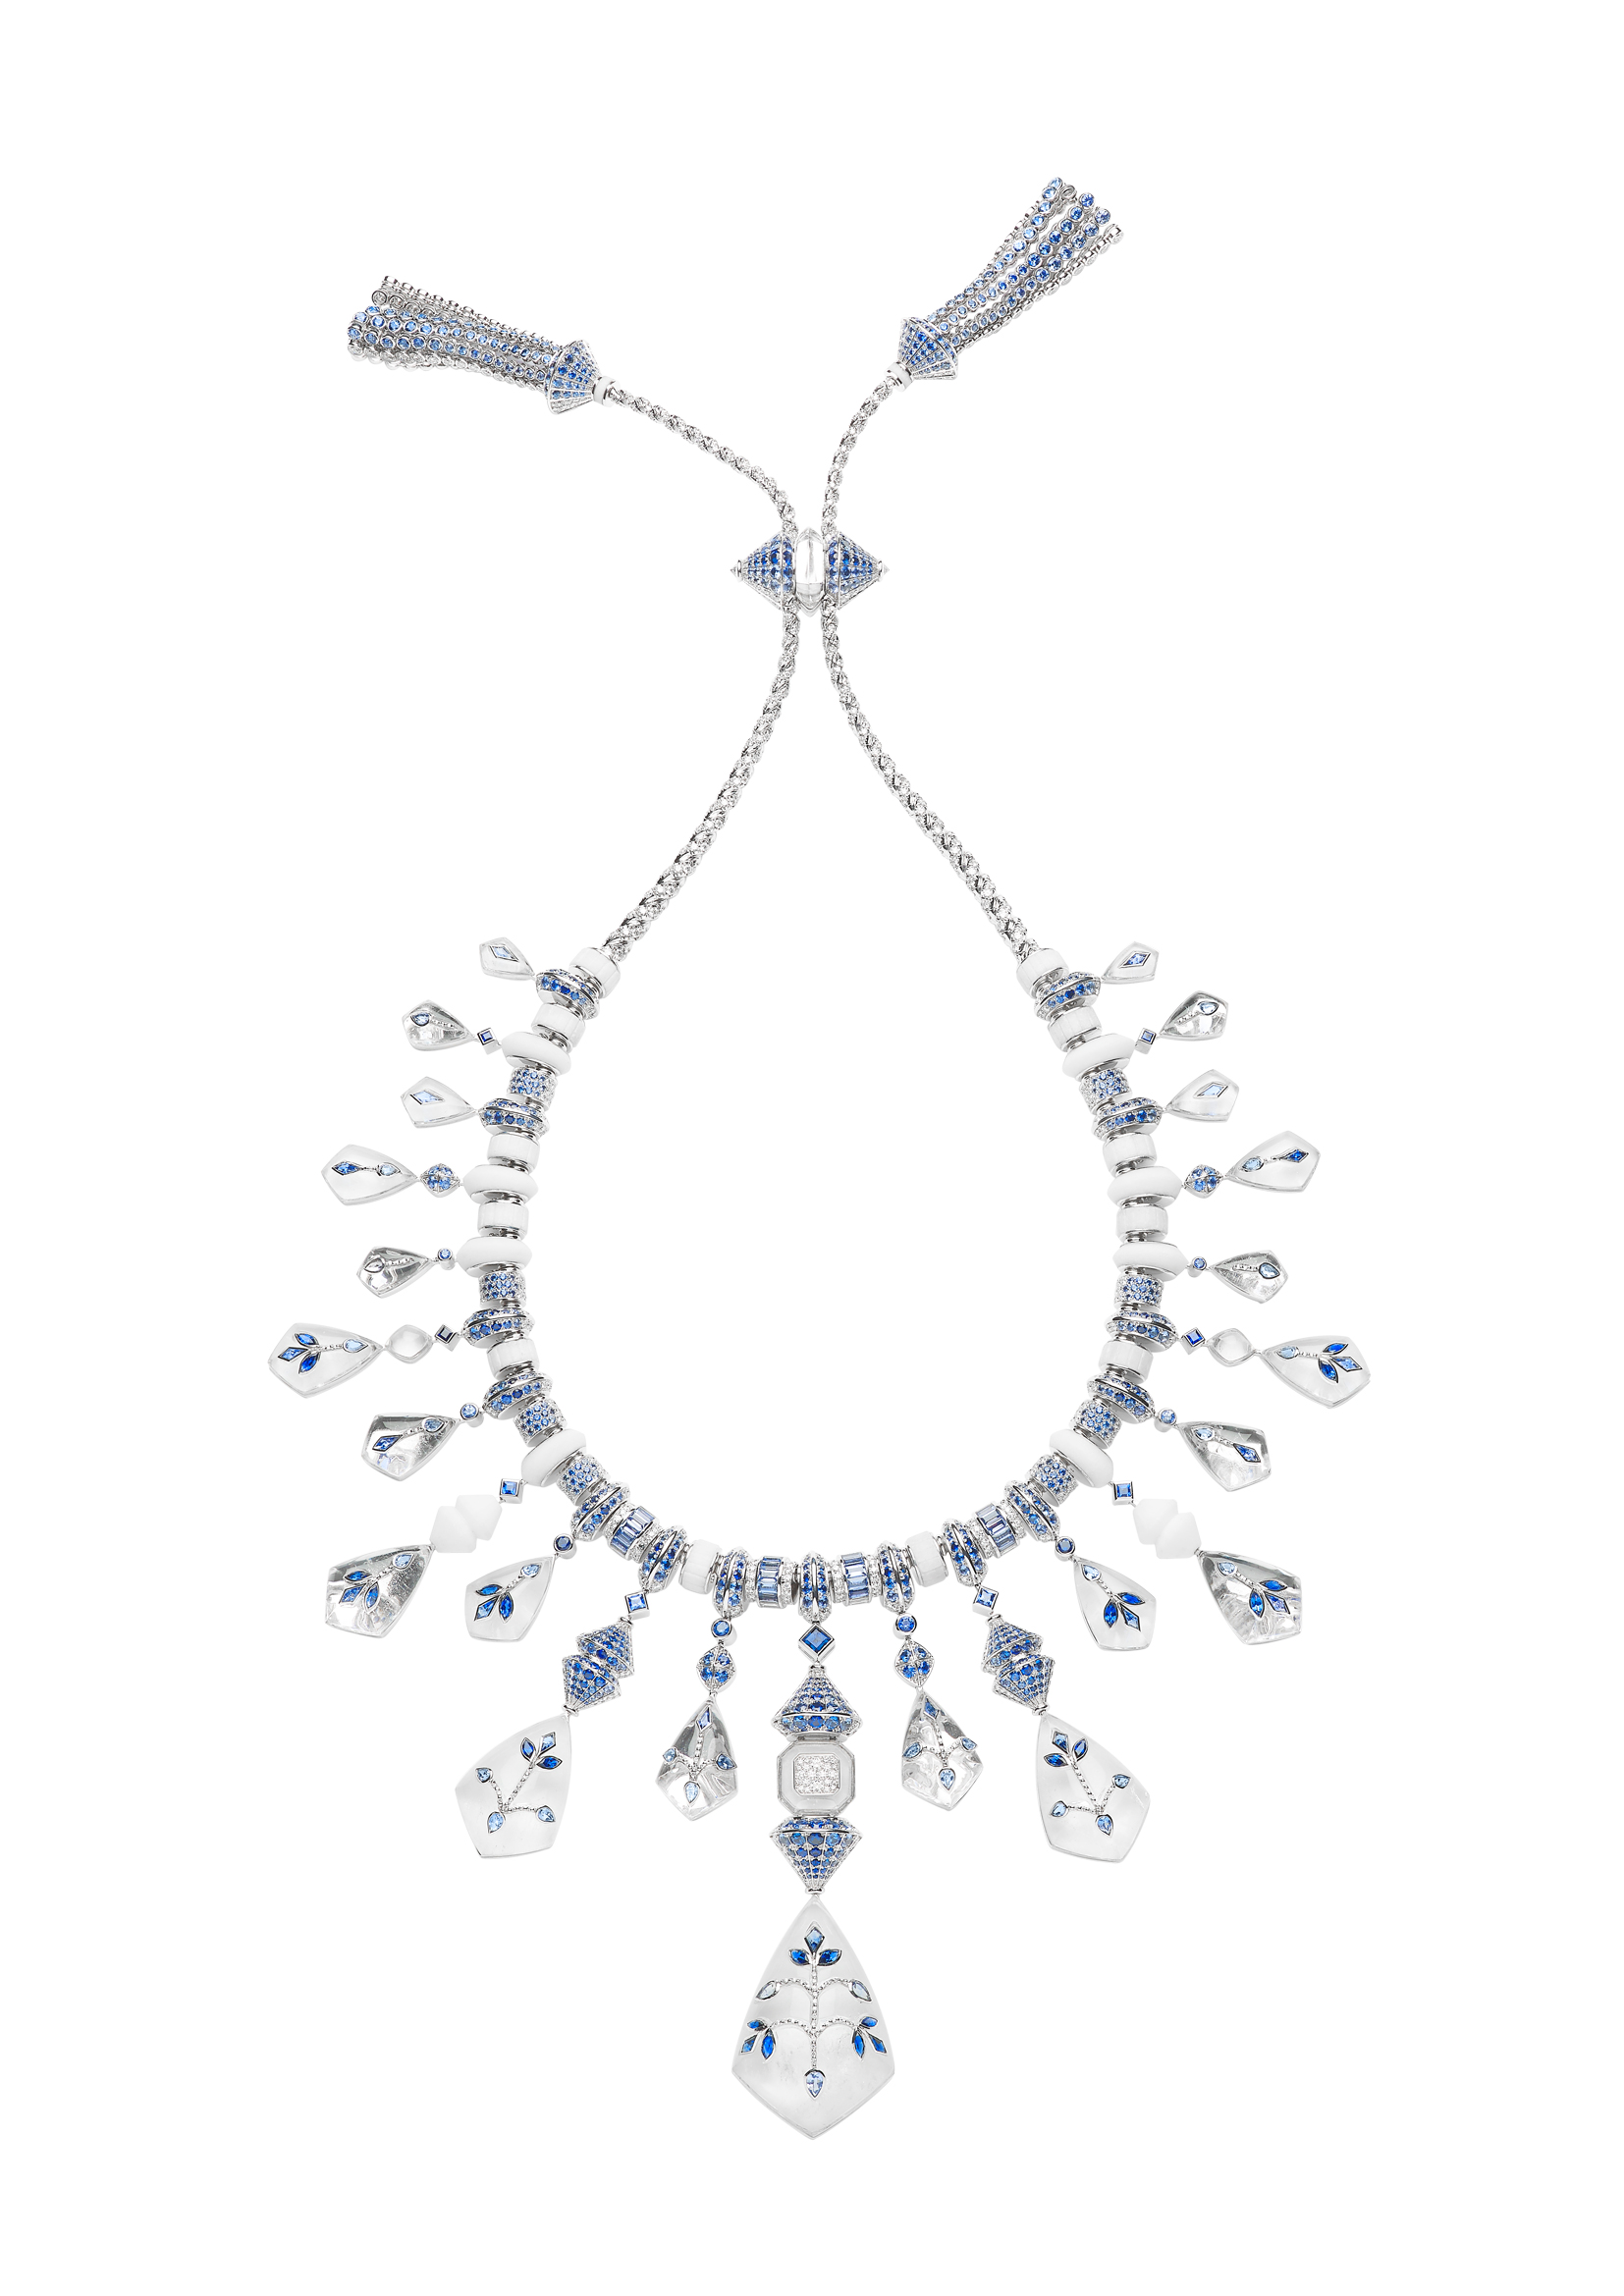 Boucheron creates stunning jewellery and timepieces, such as the Jodhpur neklace from their latest high jewellery collection